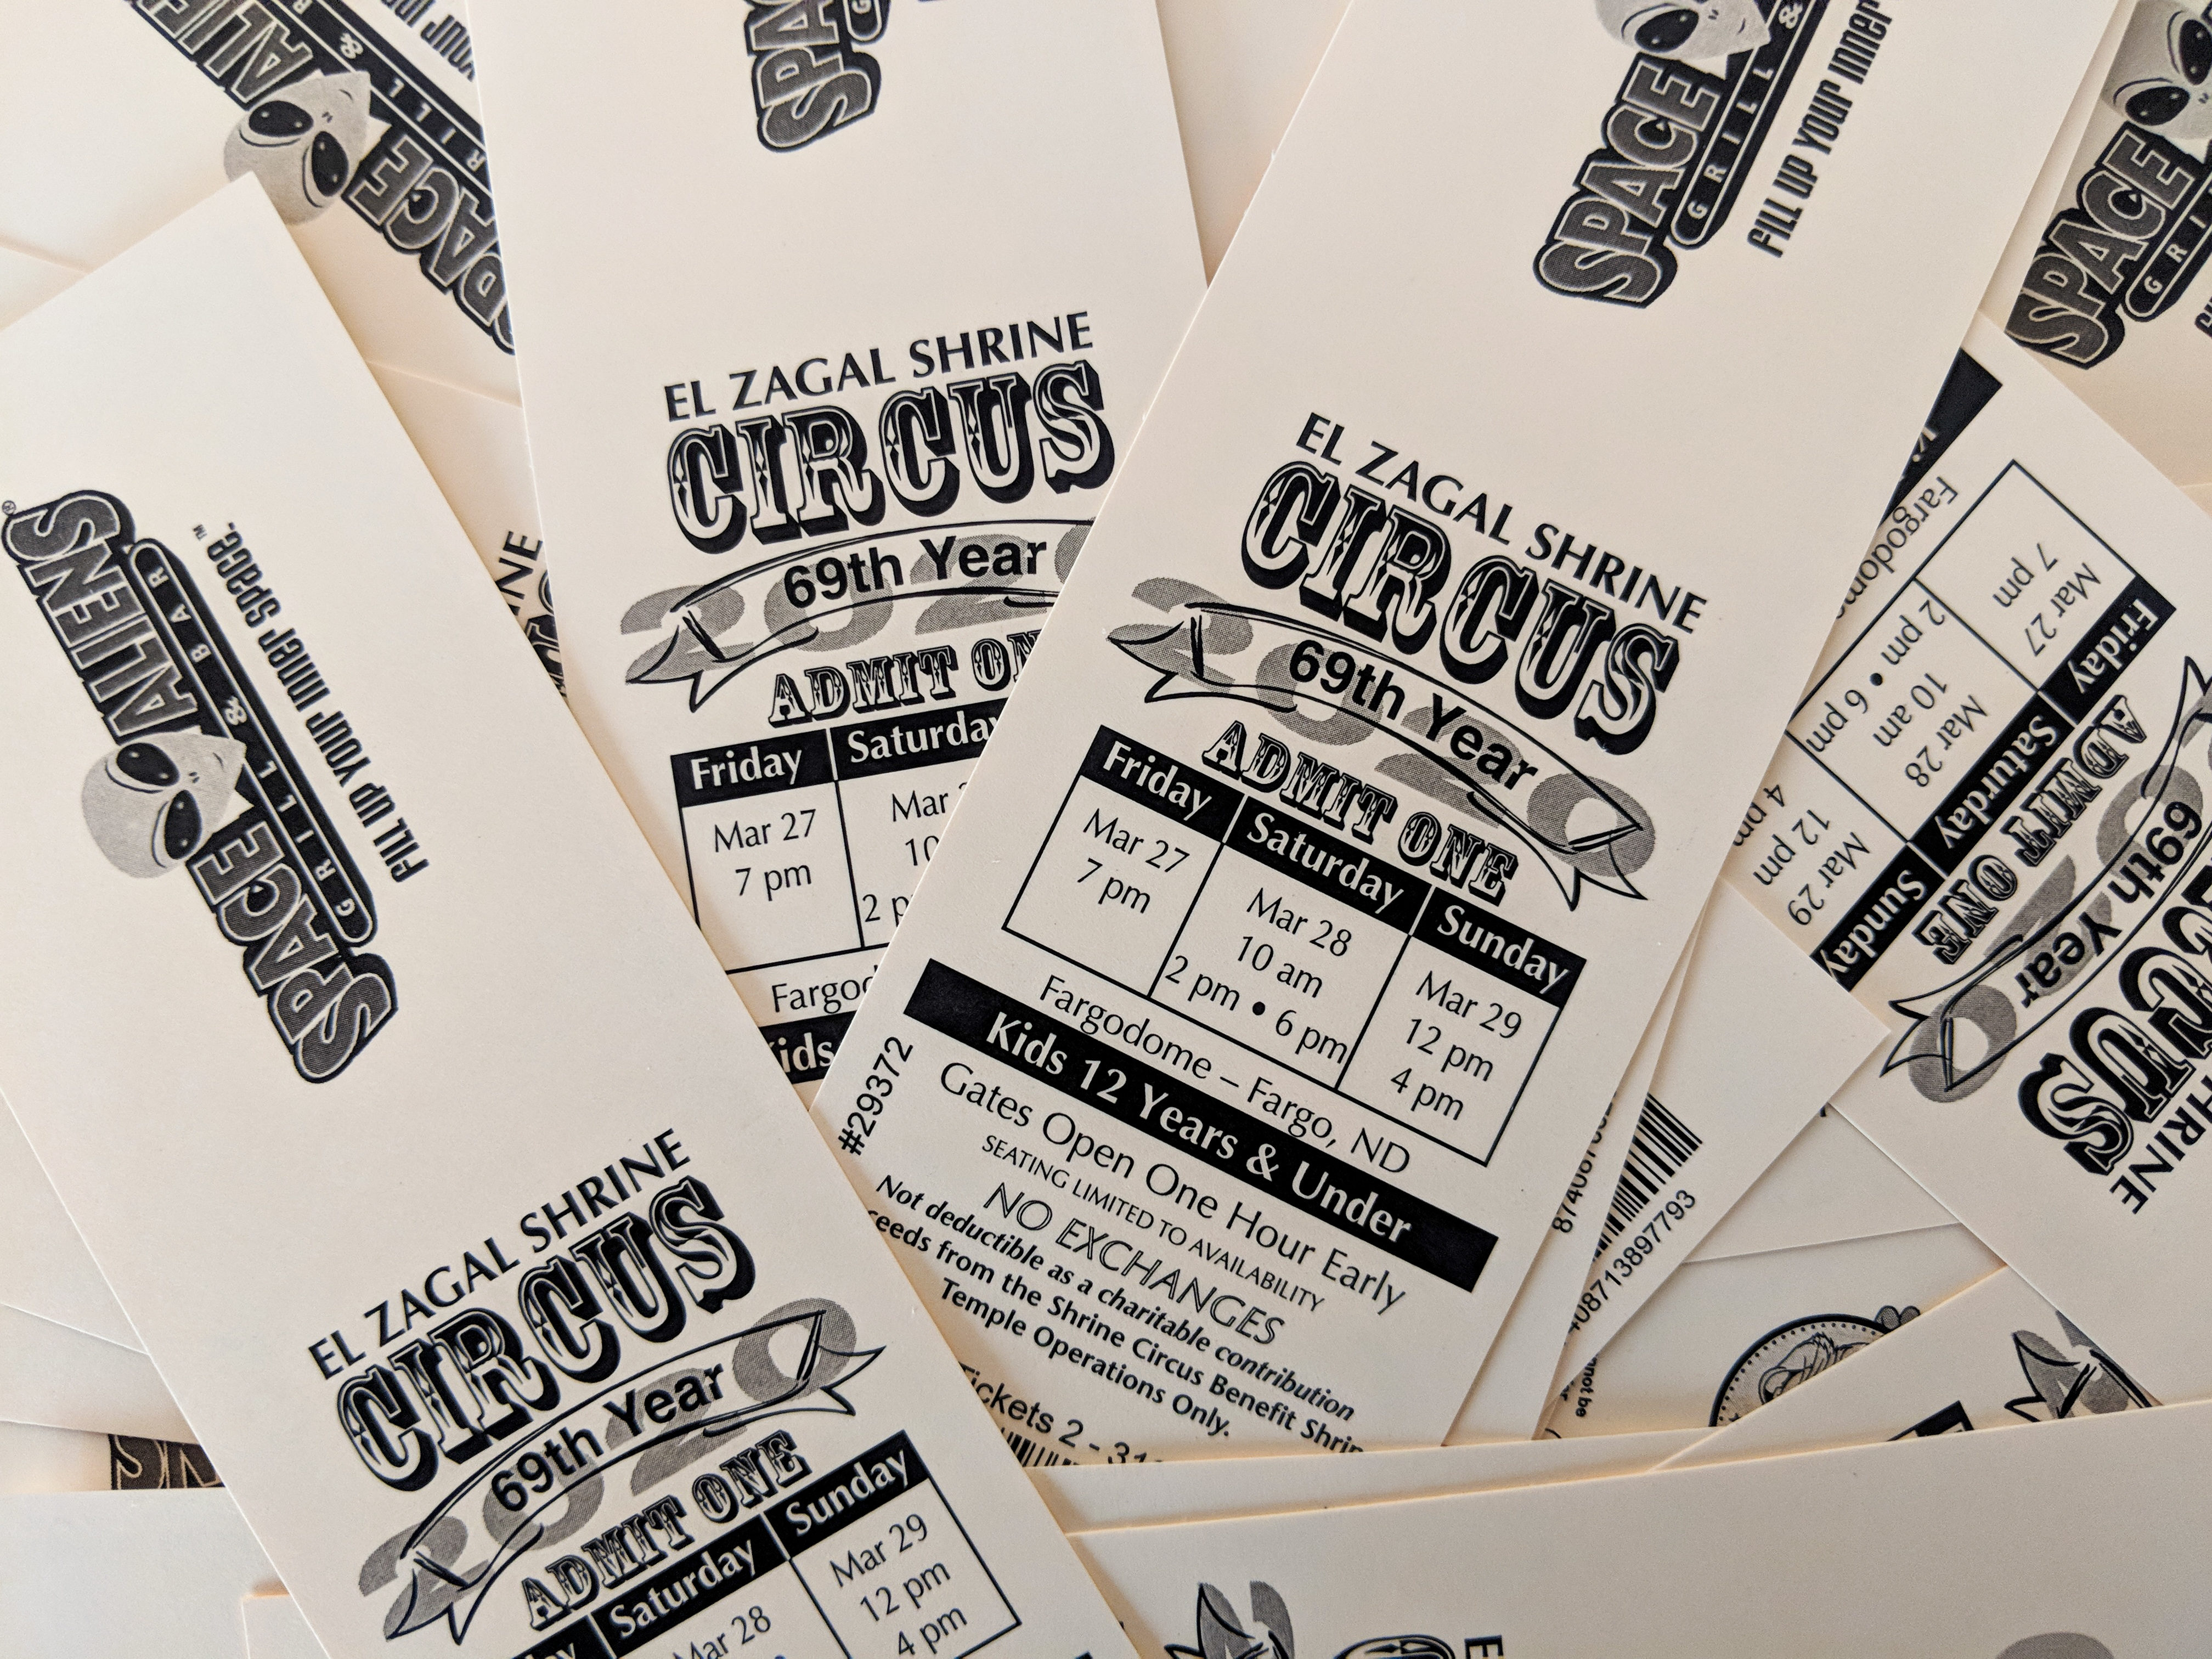 circus tickets